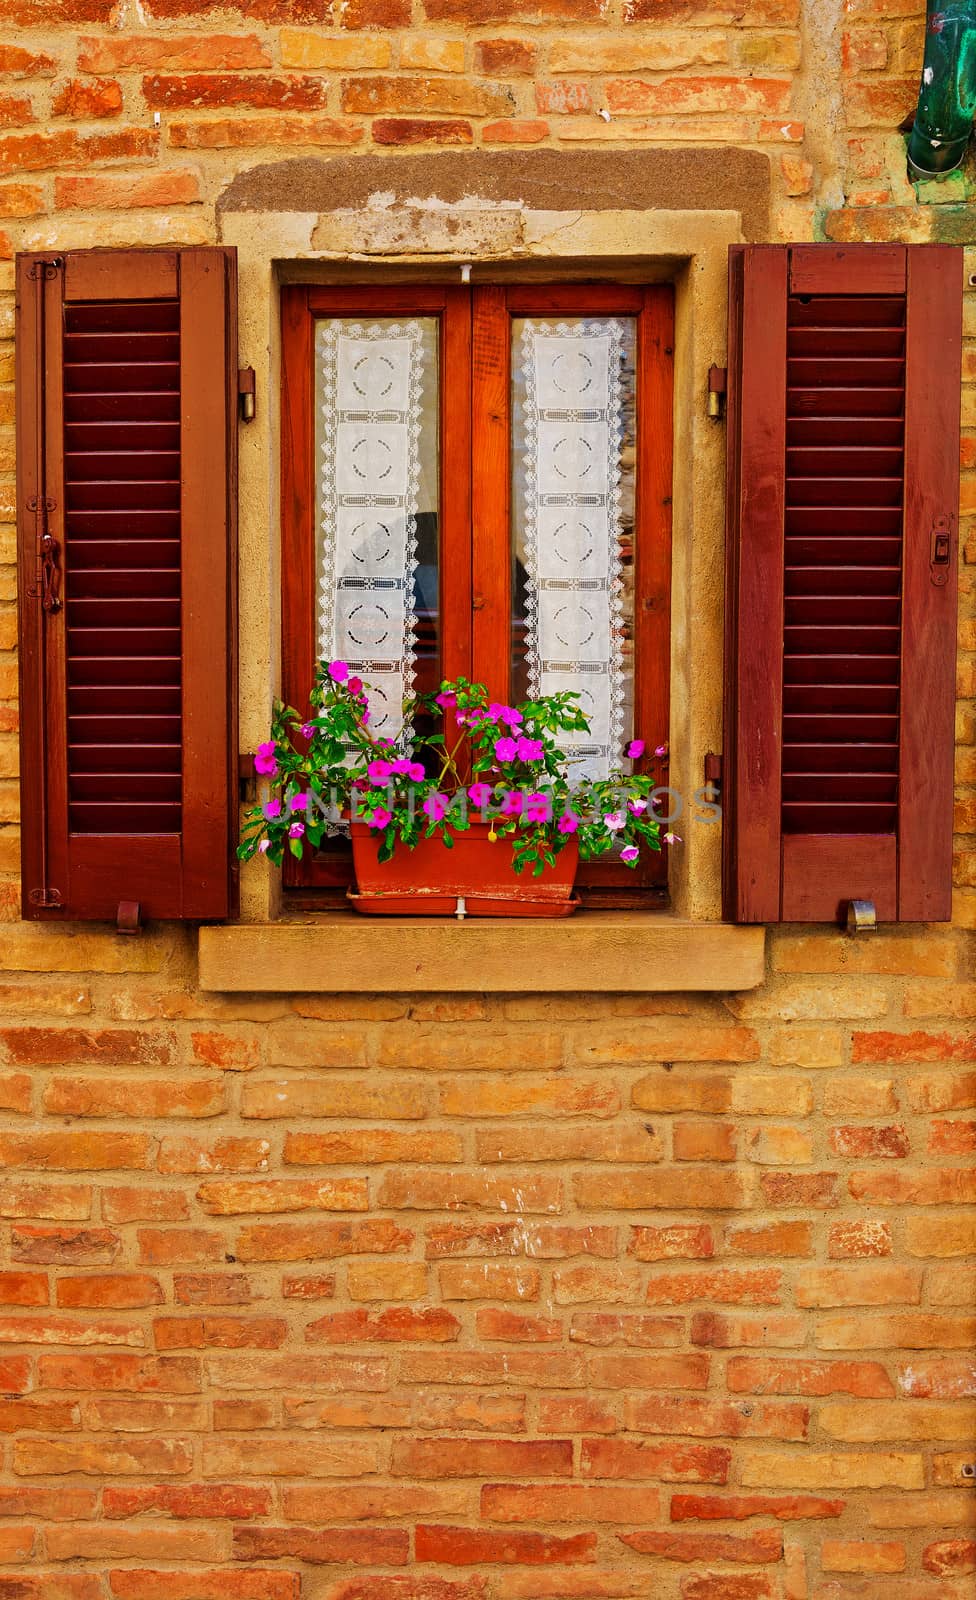 Italian Window with Open Wooden Shutters, Decorated With Fresh Flowers